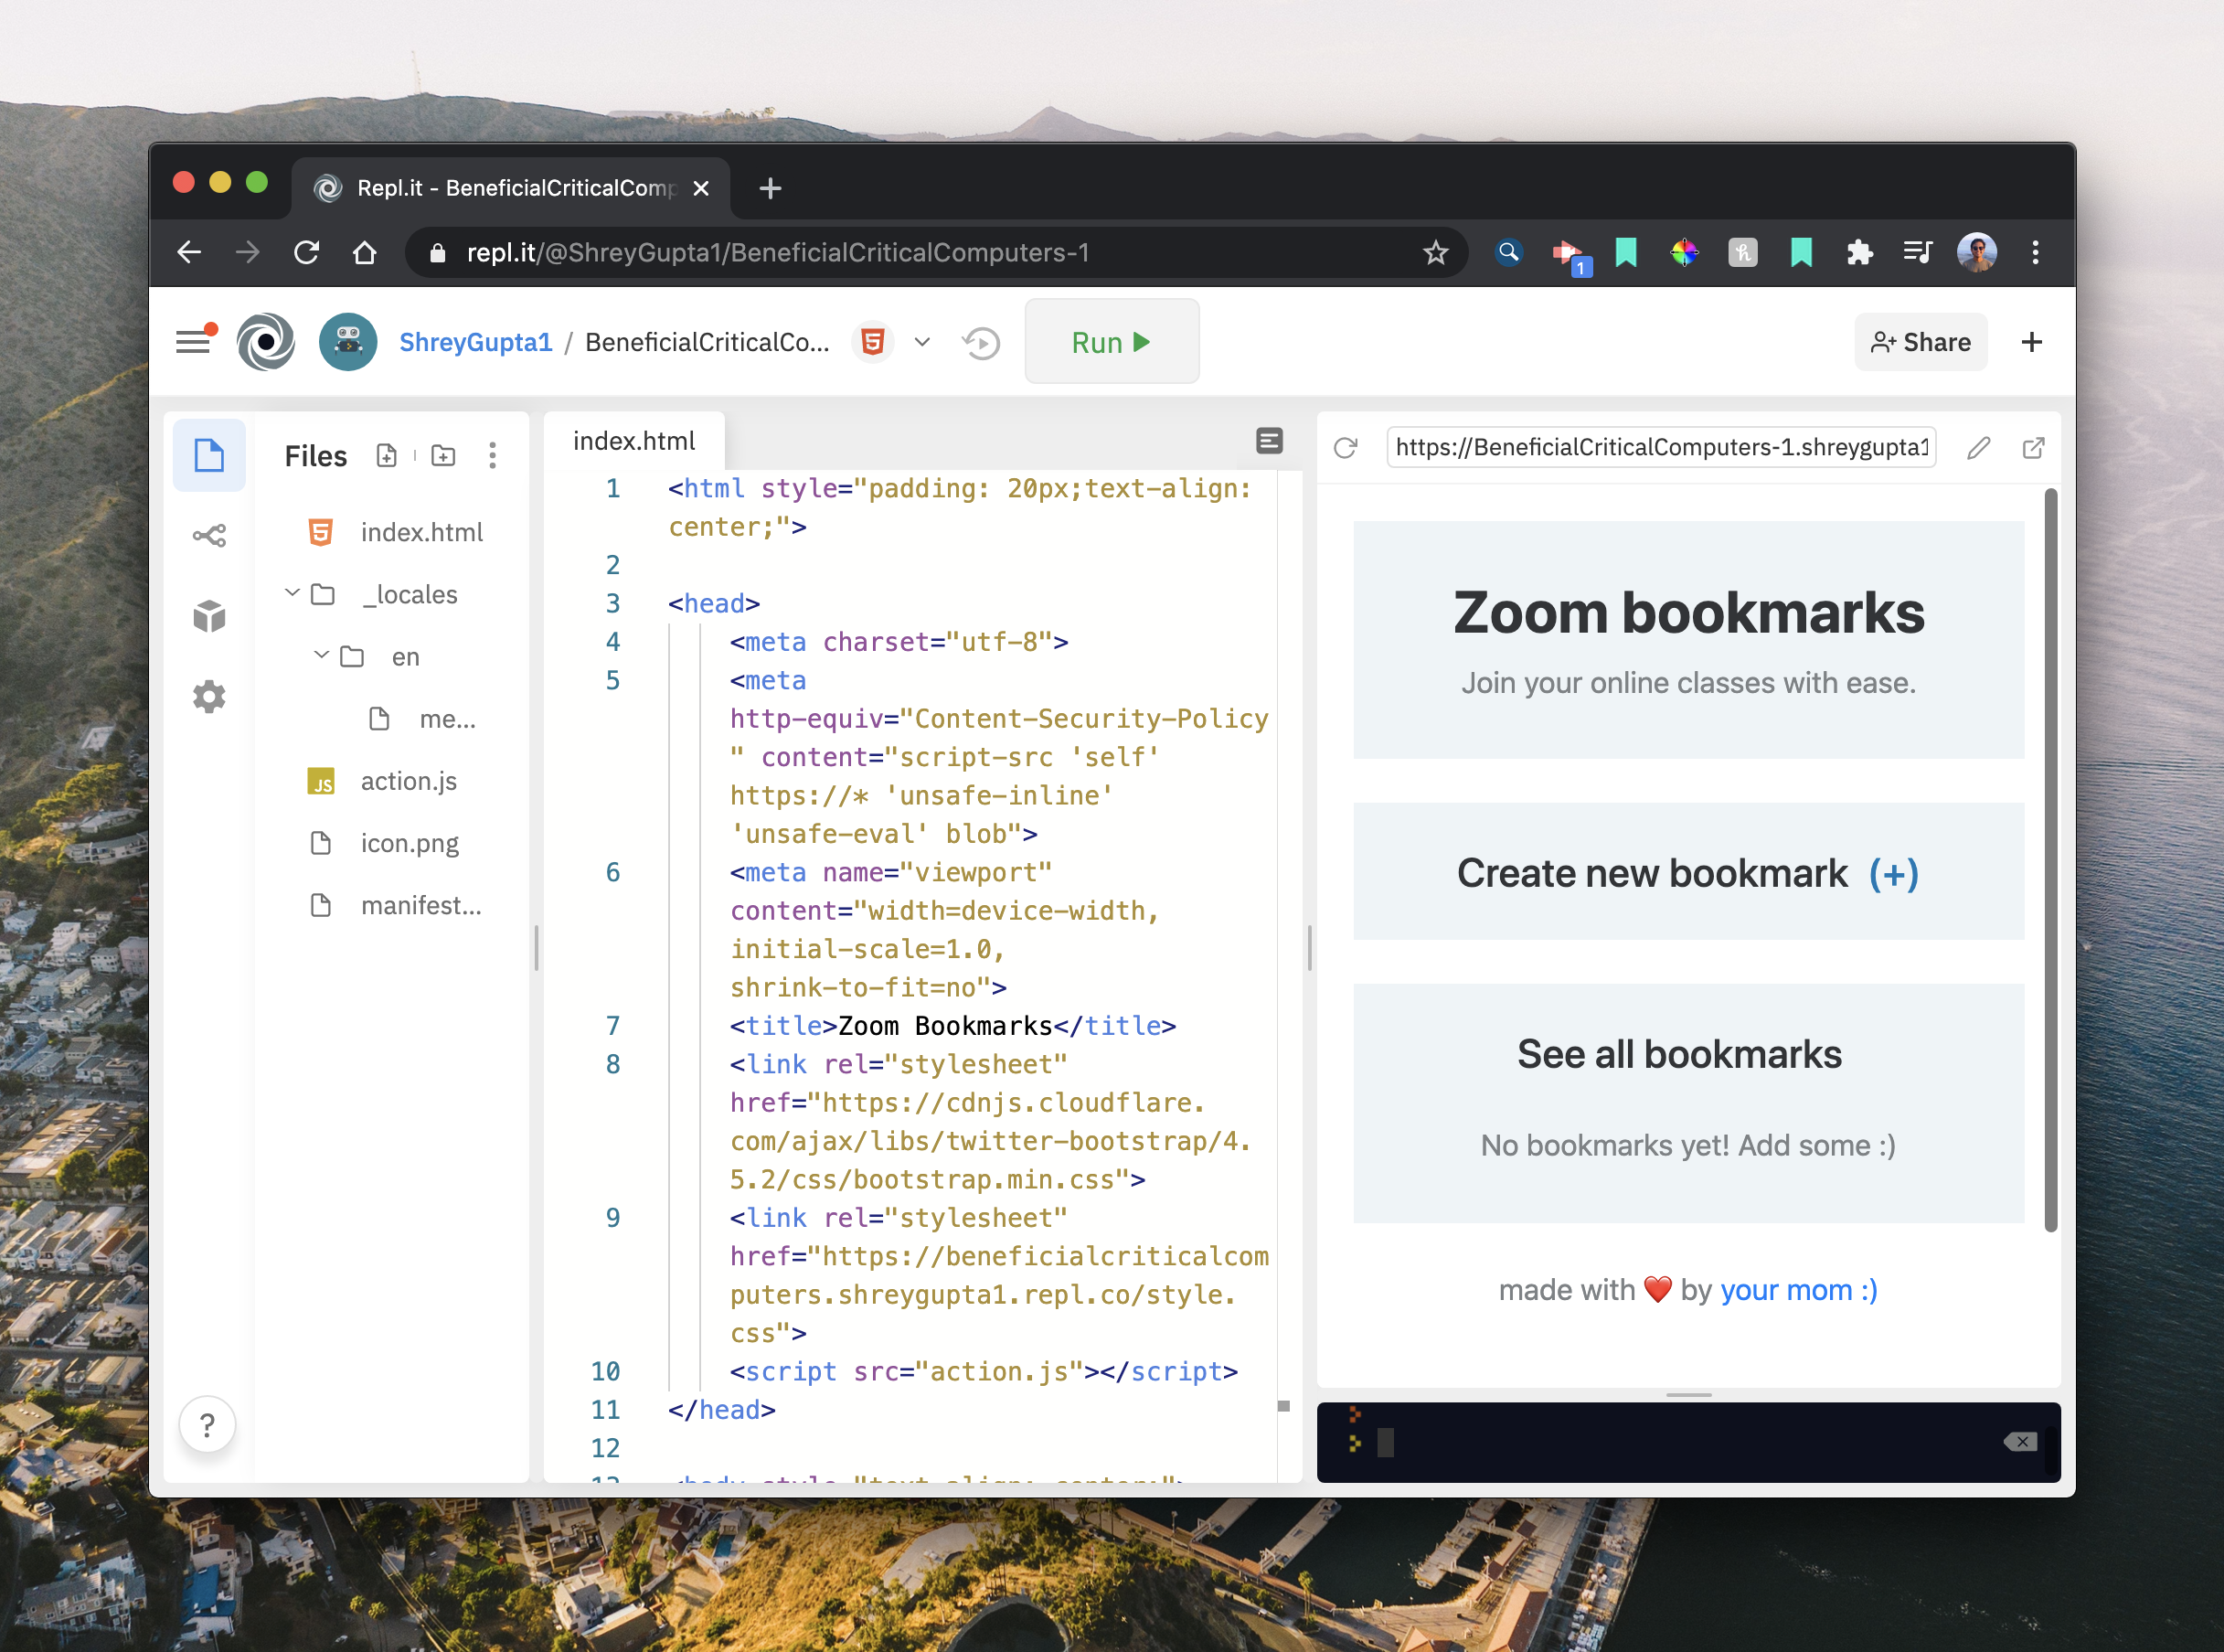 Final Repl design of Zoom Bookmarks